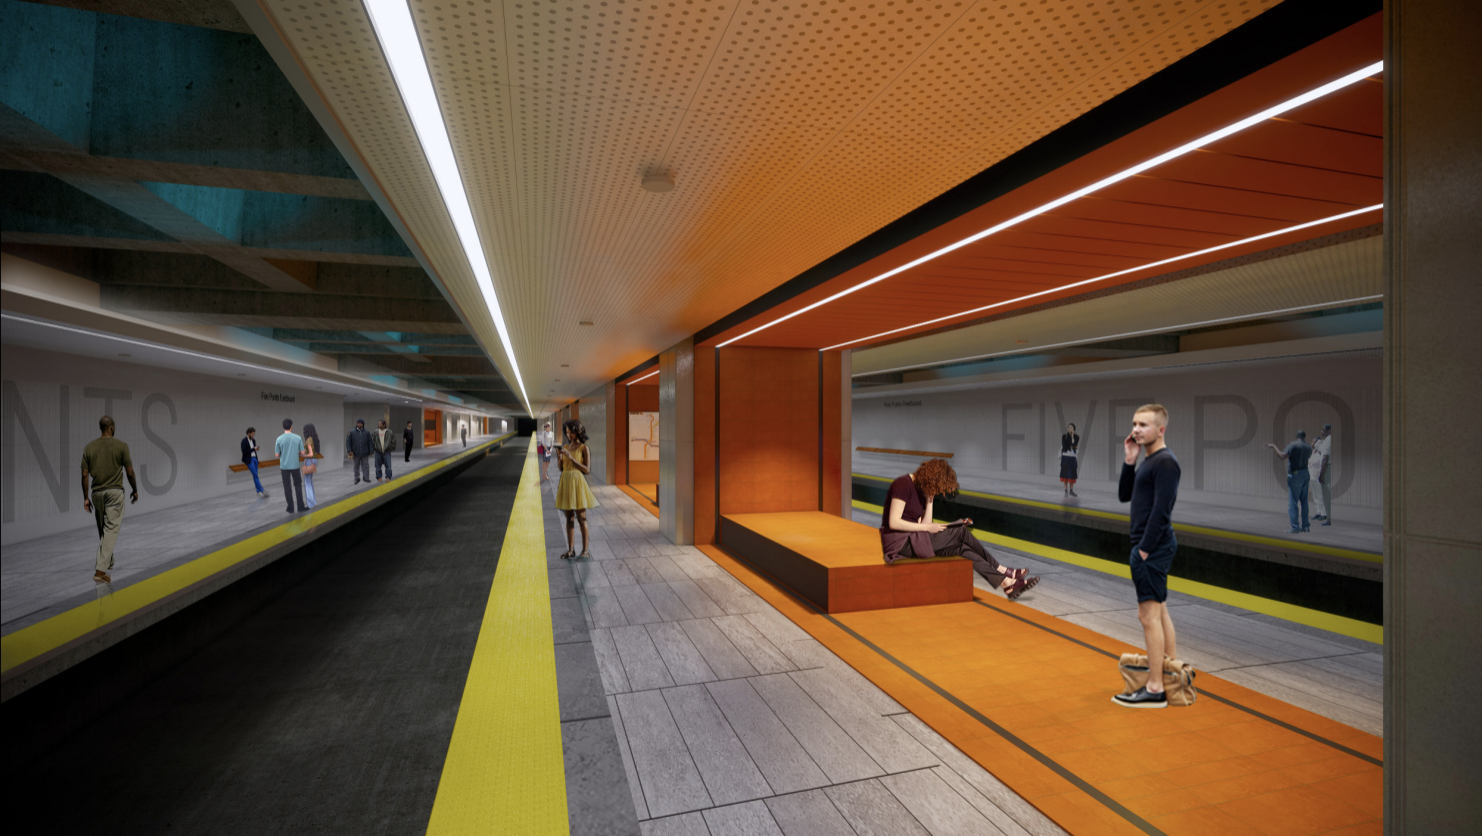 A rendering of a refurbished MARTA station with orange light installations and passengers